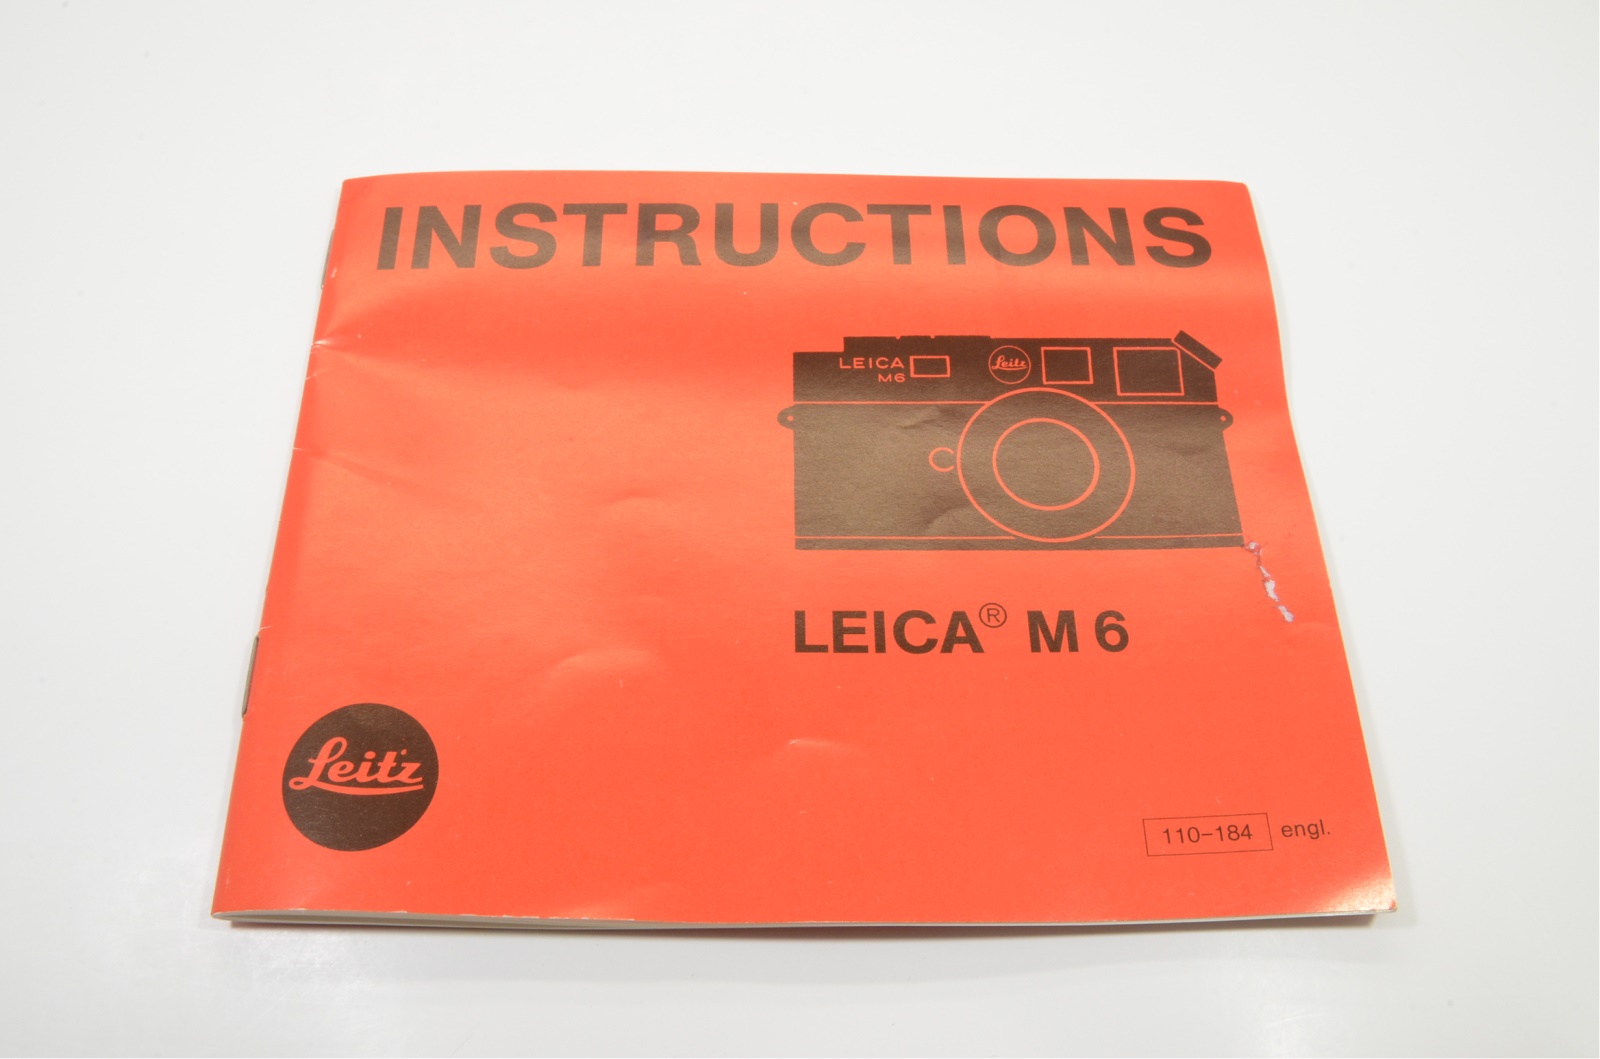 leica m6 empty box, plastic case, and english instructions from japan